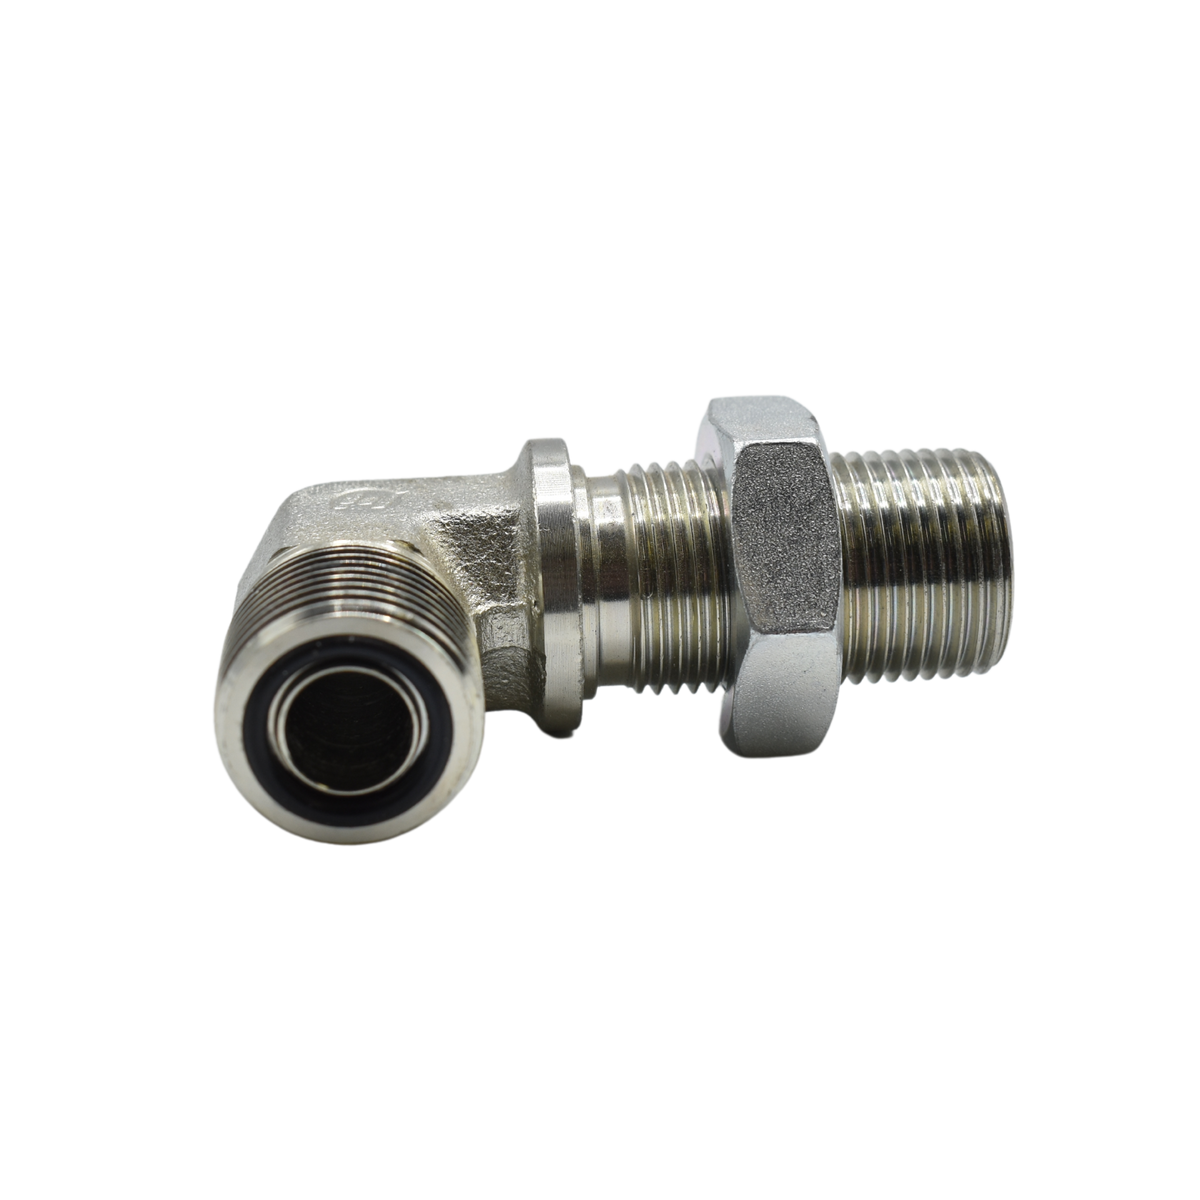 Bulkhead with Lock-nut 90 degree Elbow Forger Adapter